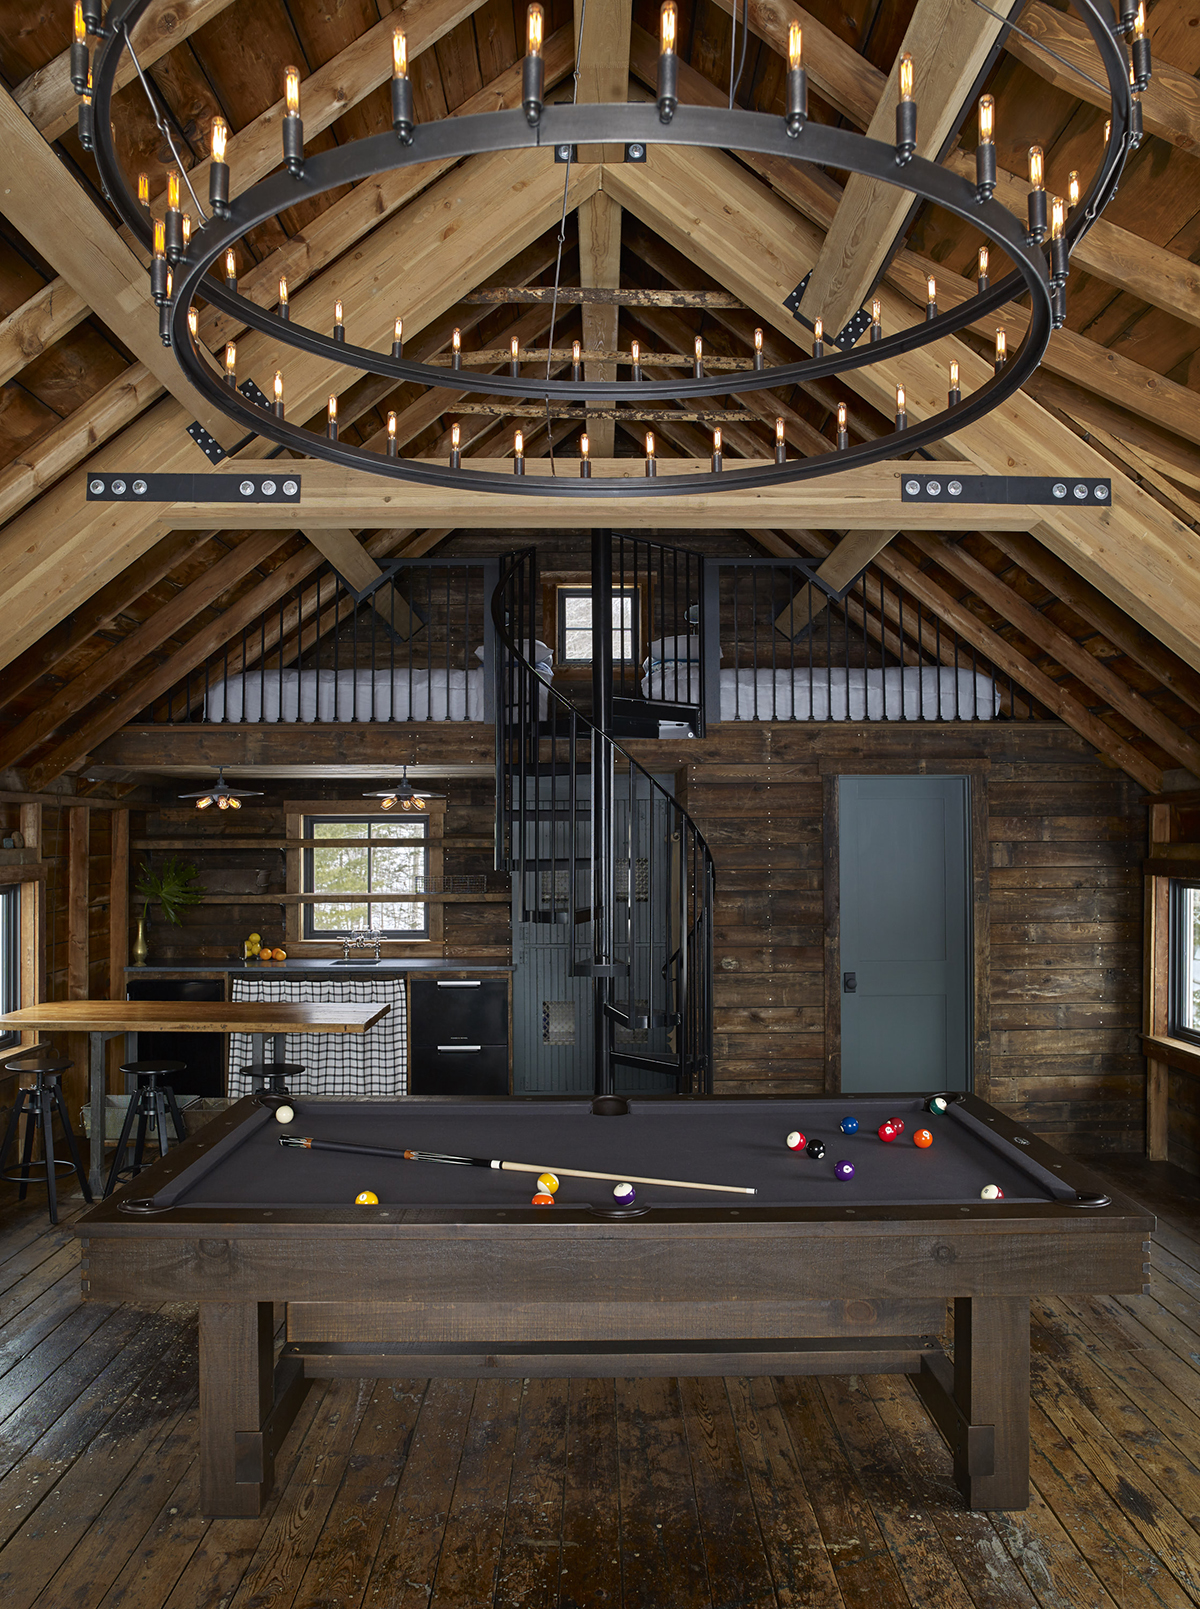 The pool table under the rustic chandelier and cathedral ceilings